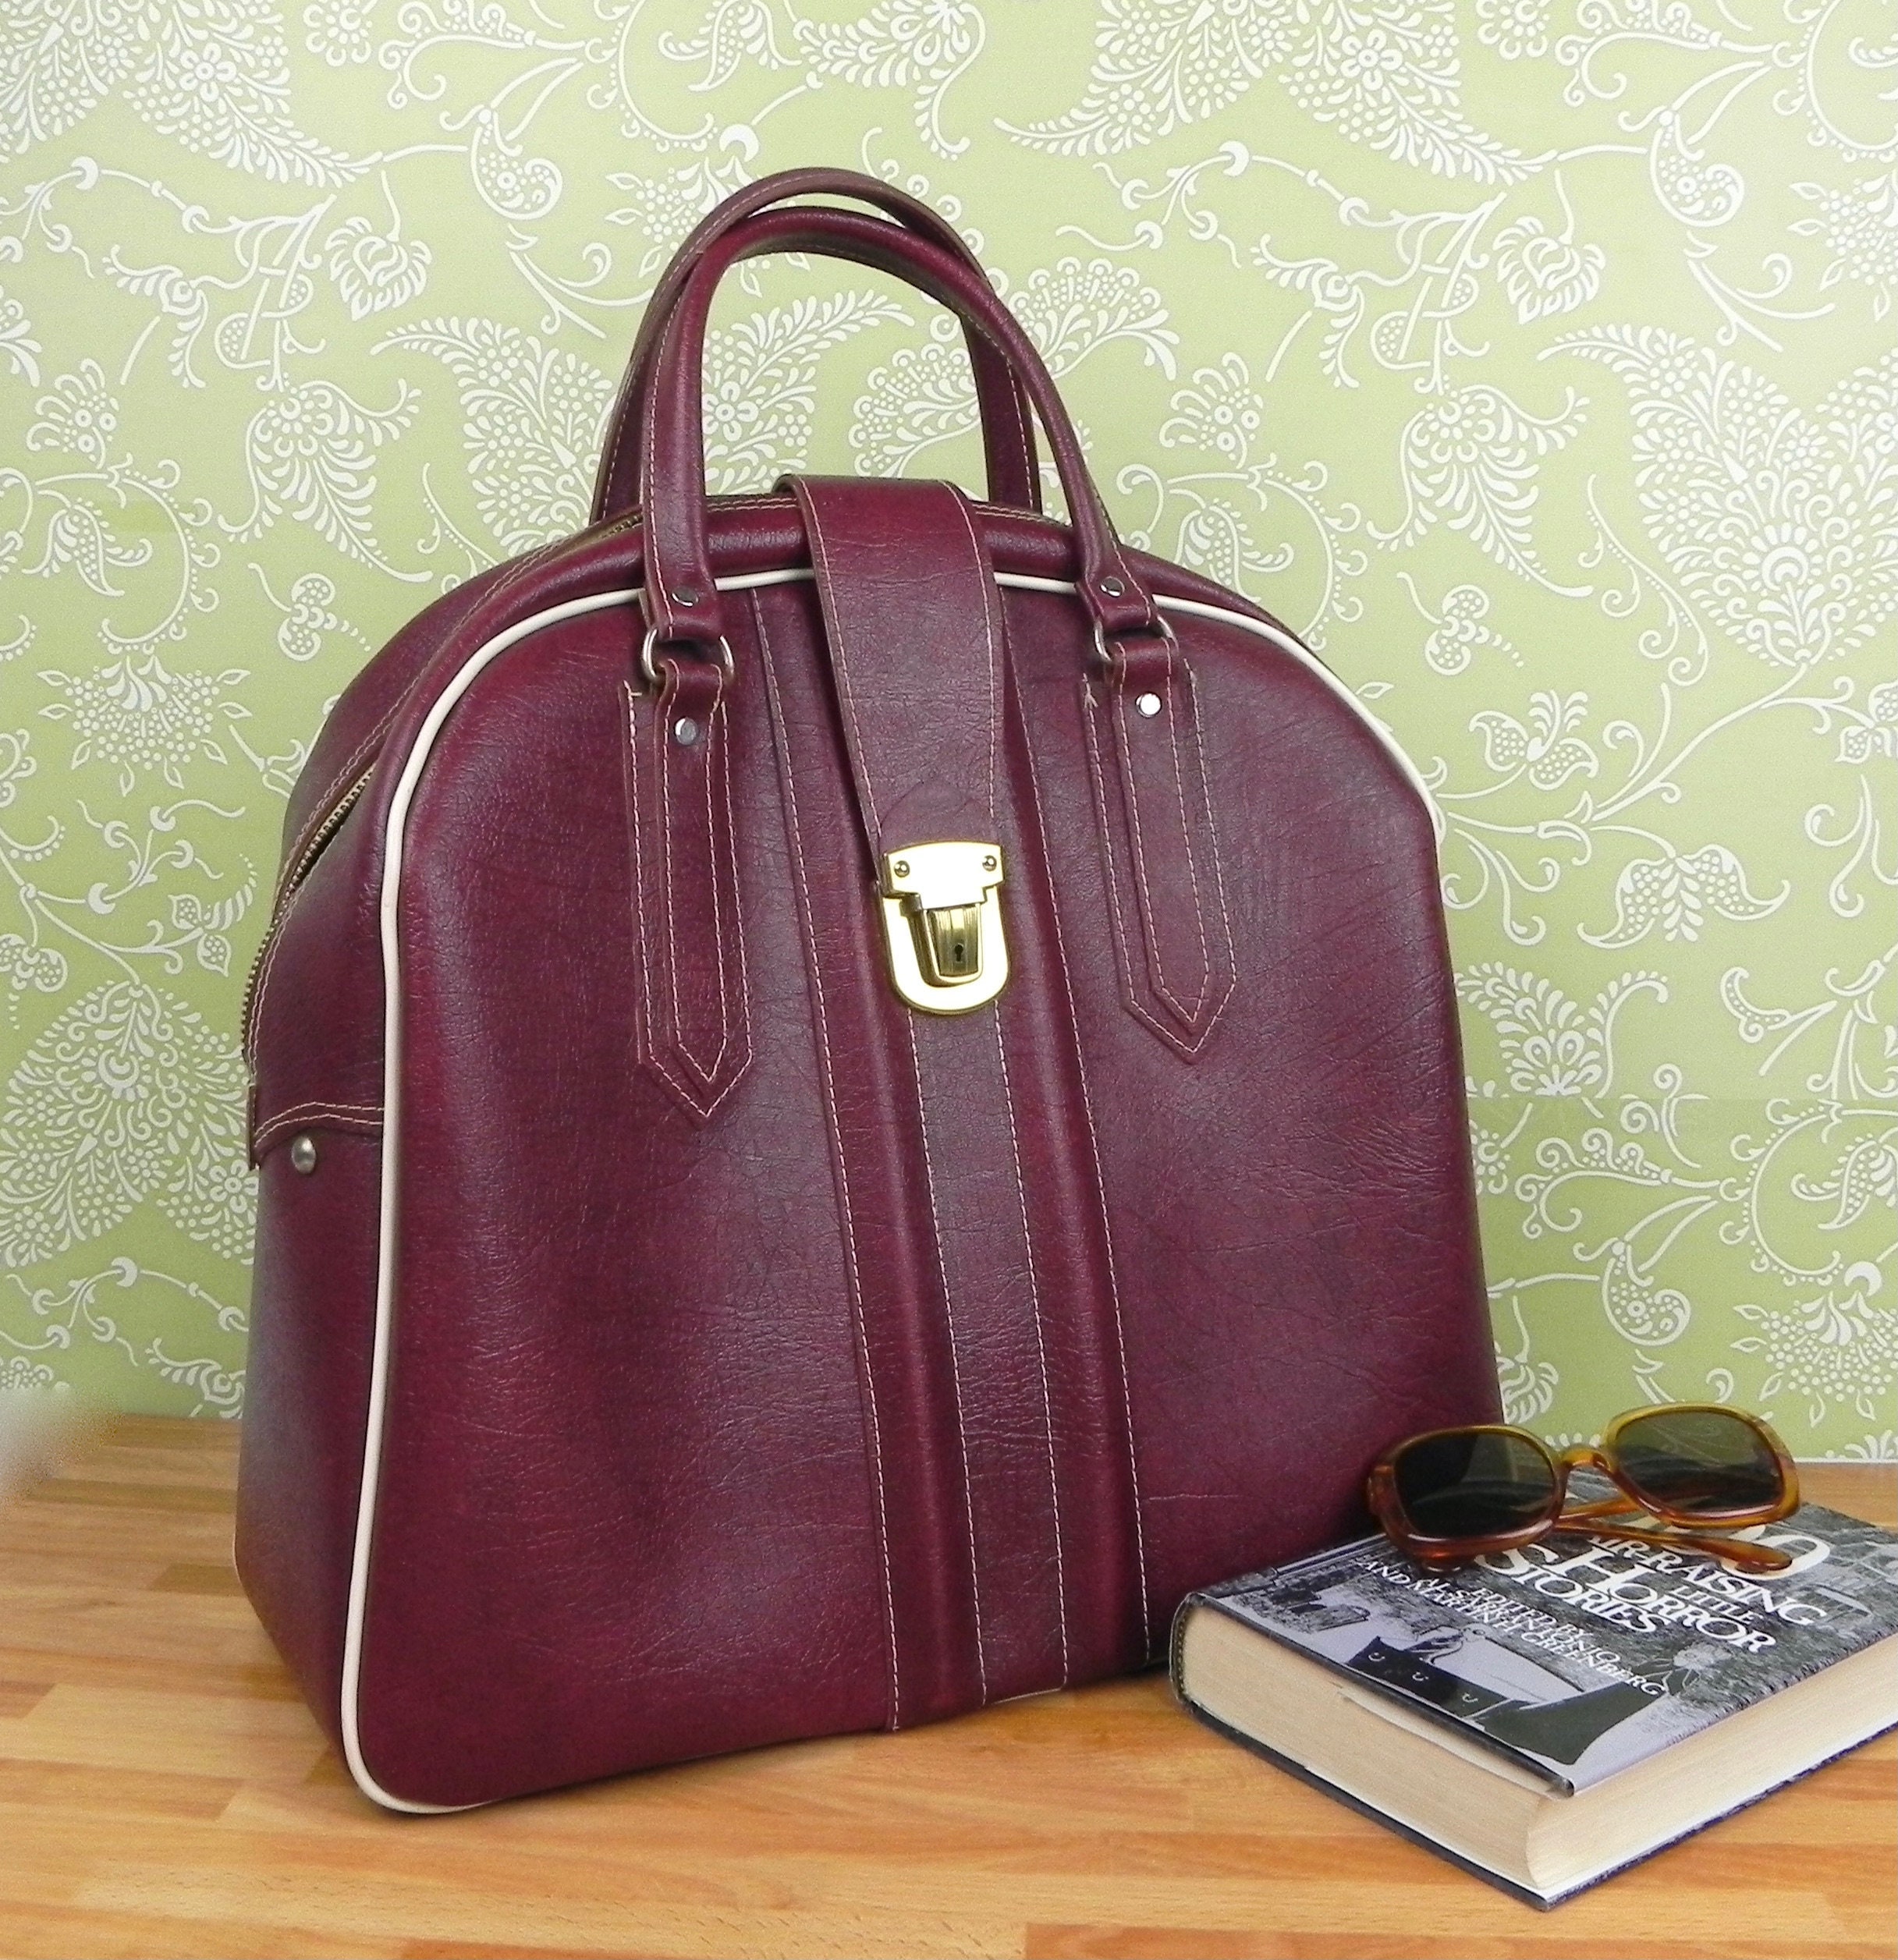 Rogue Leather » Blog Archive » Project: The Bowling Ball Bag